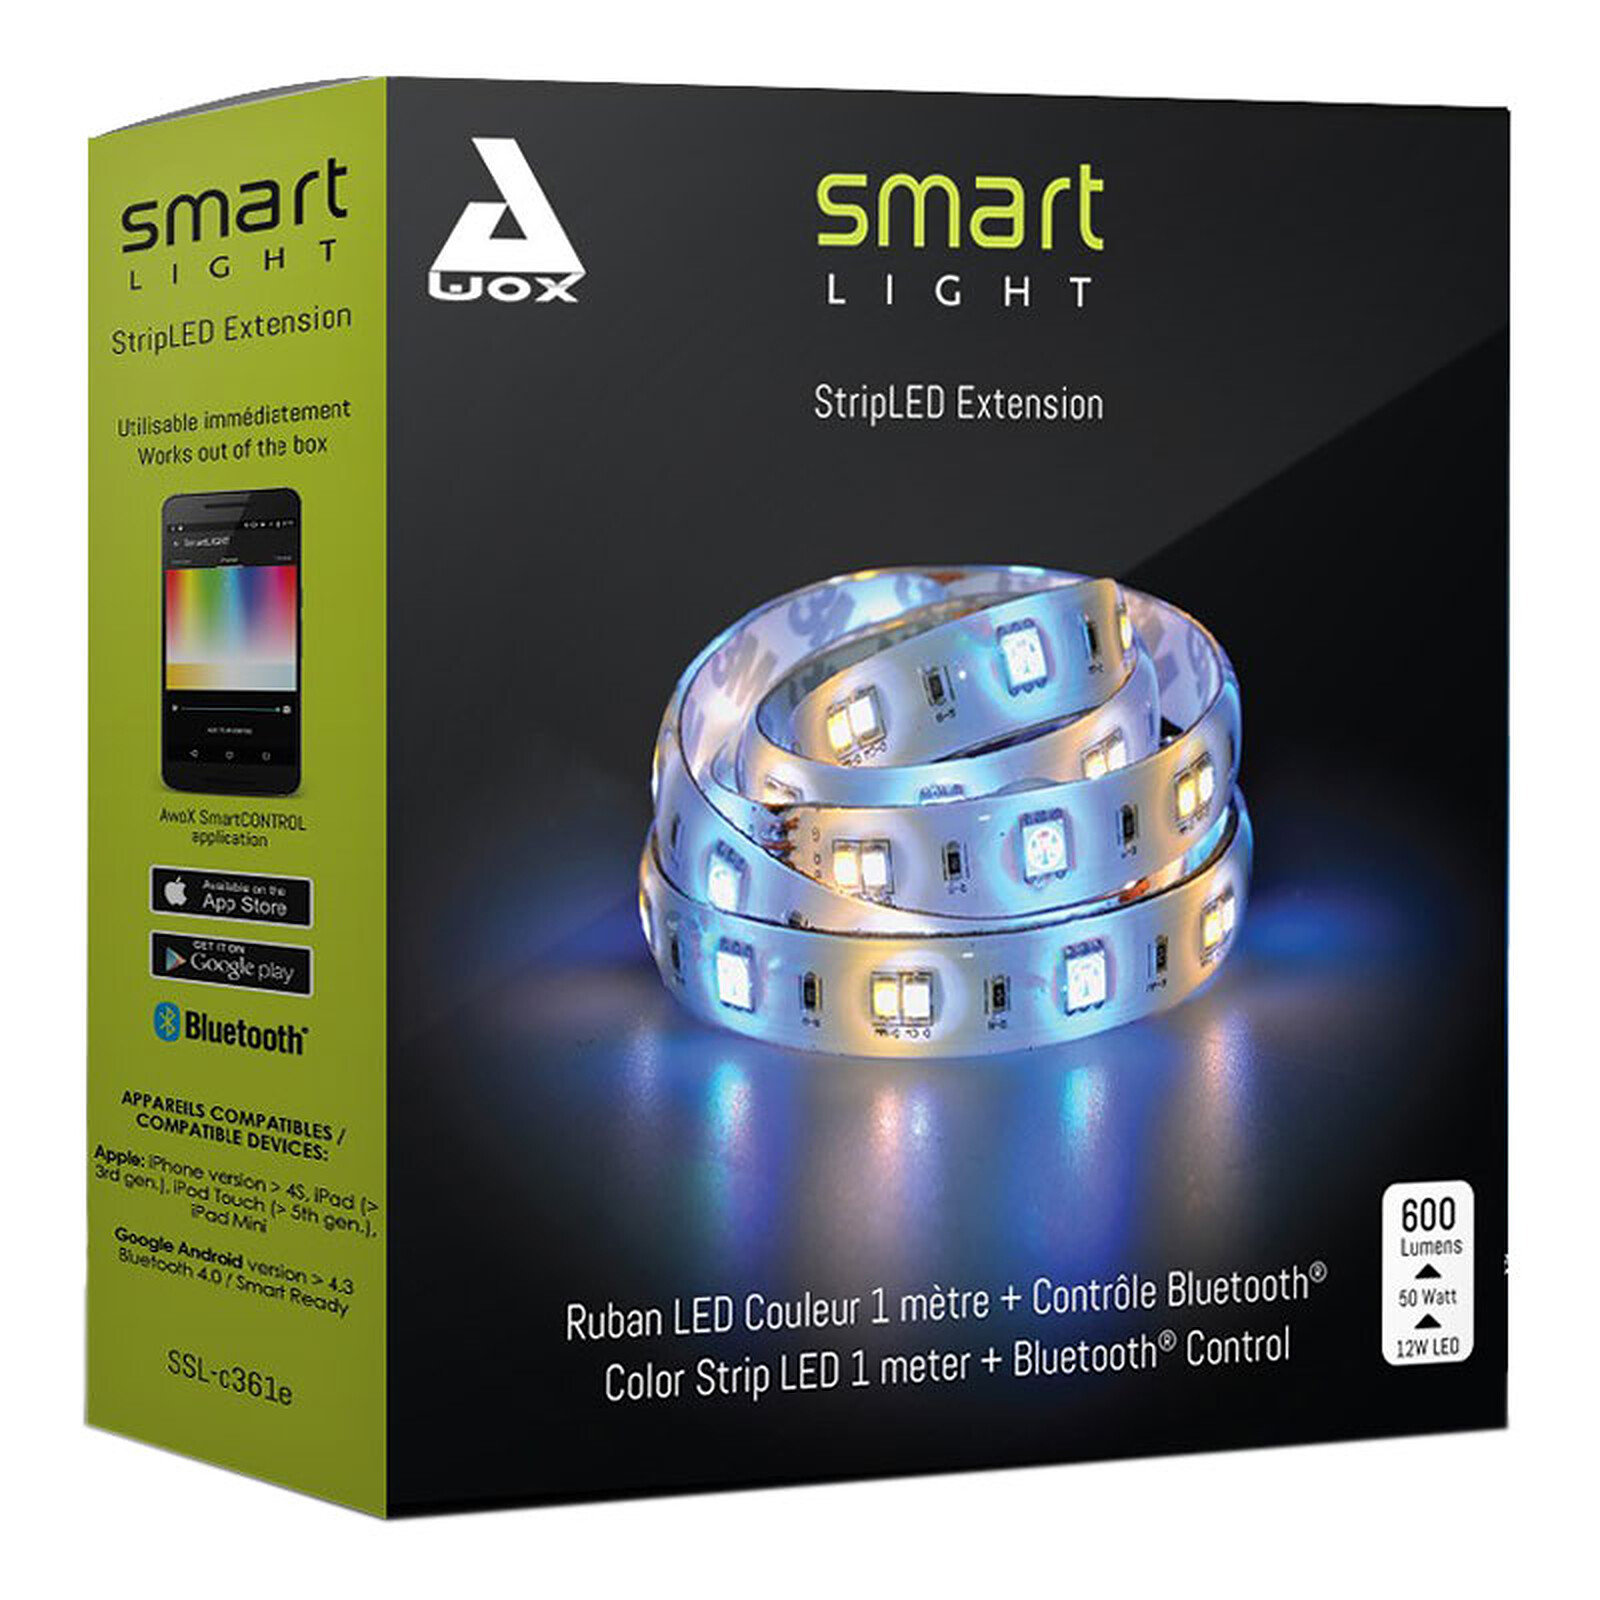 AwoX SmartCONTROL on the App Store